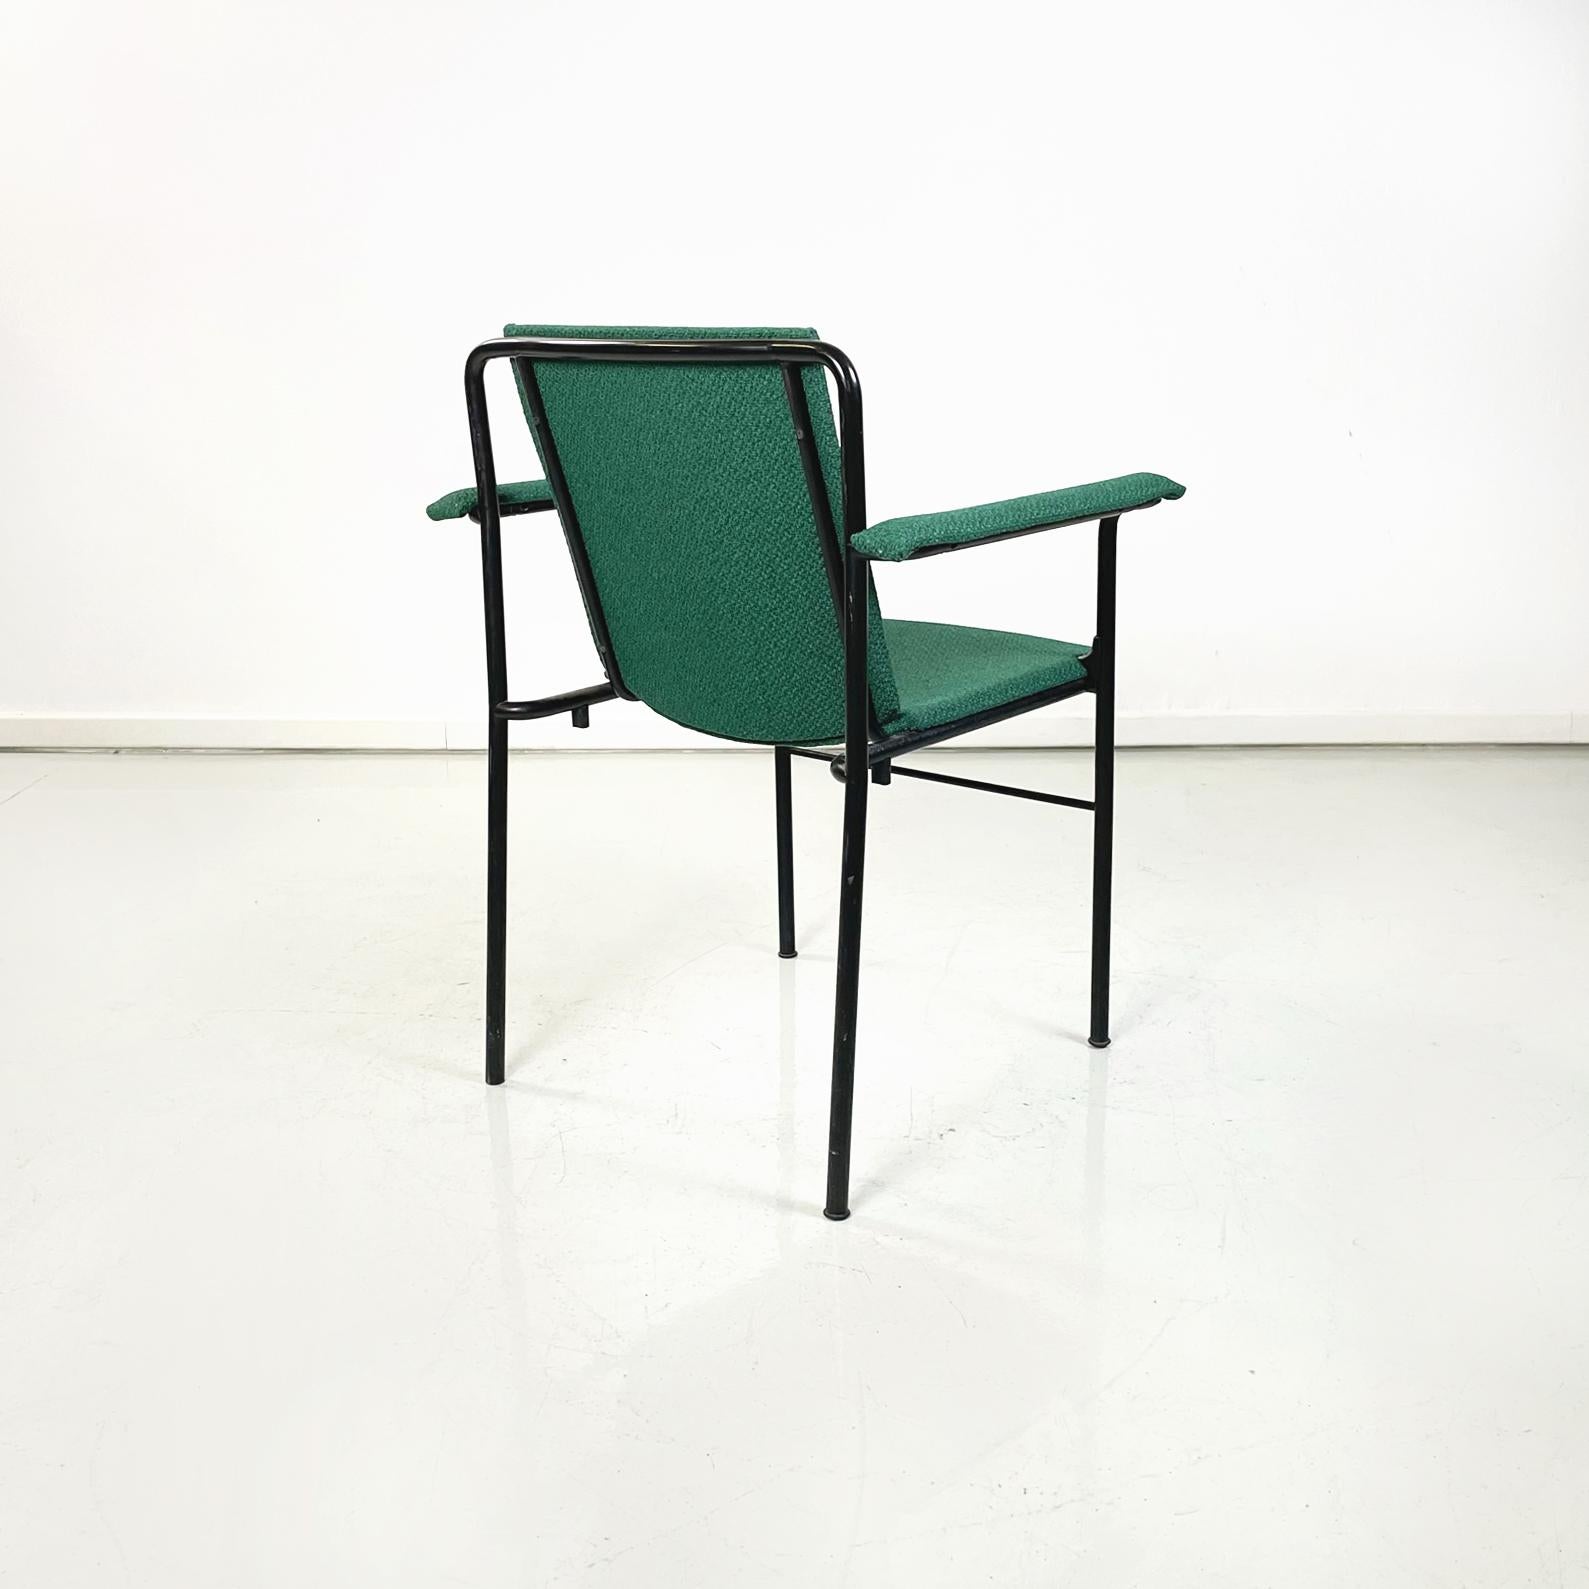 Late 20th Century Italian Modern Armchairs Movie Chair by Mario Marenco for Poltrona Frau, 1980s For Sale